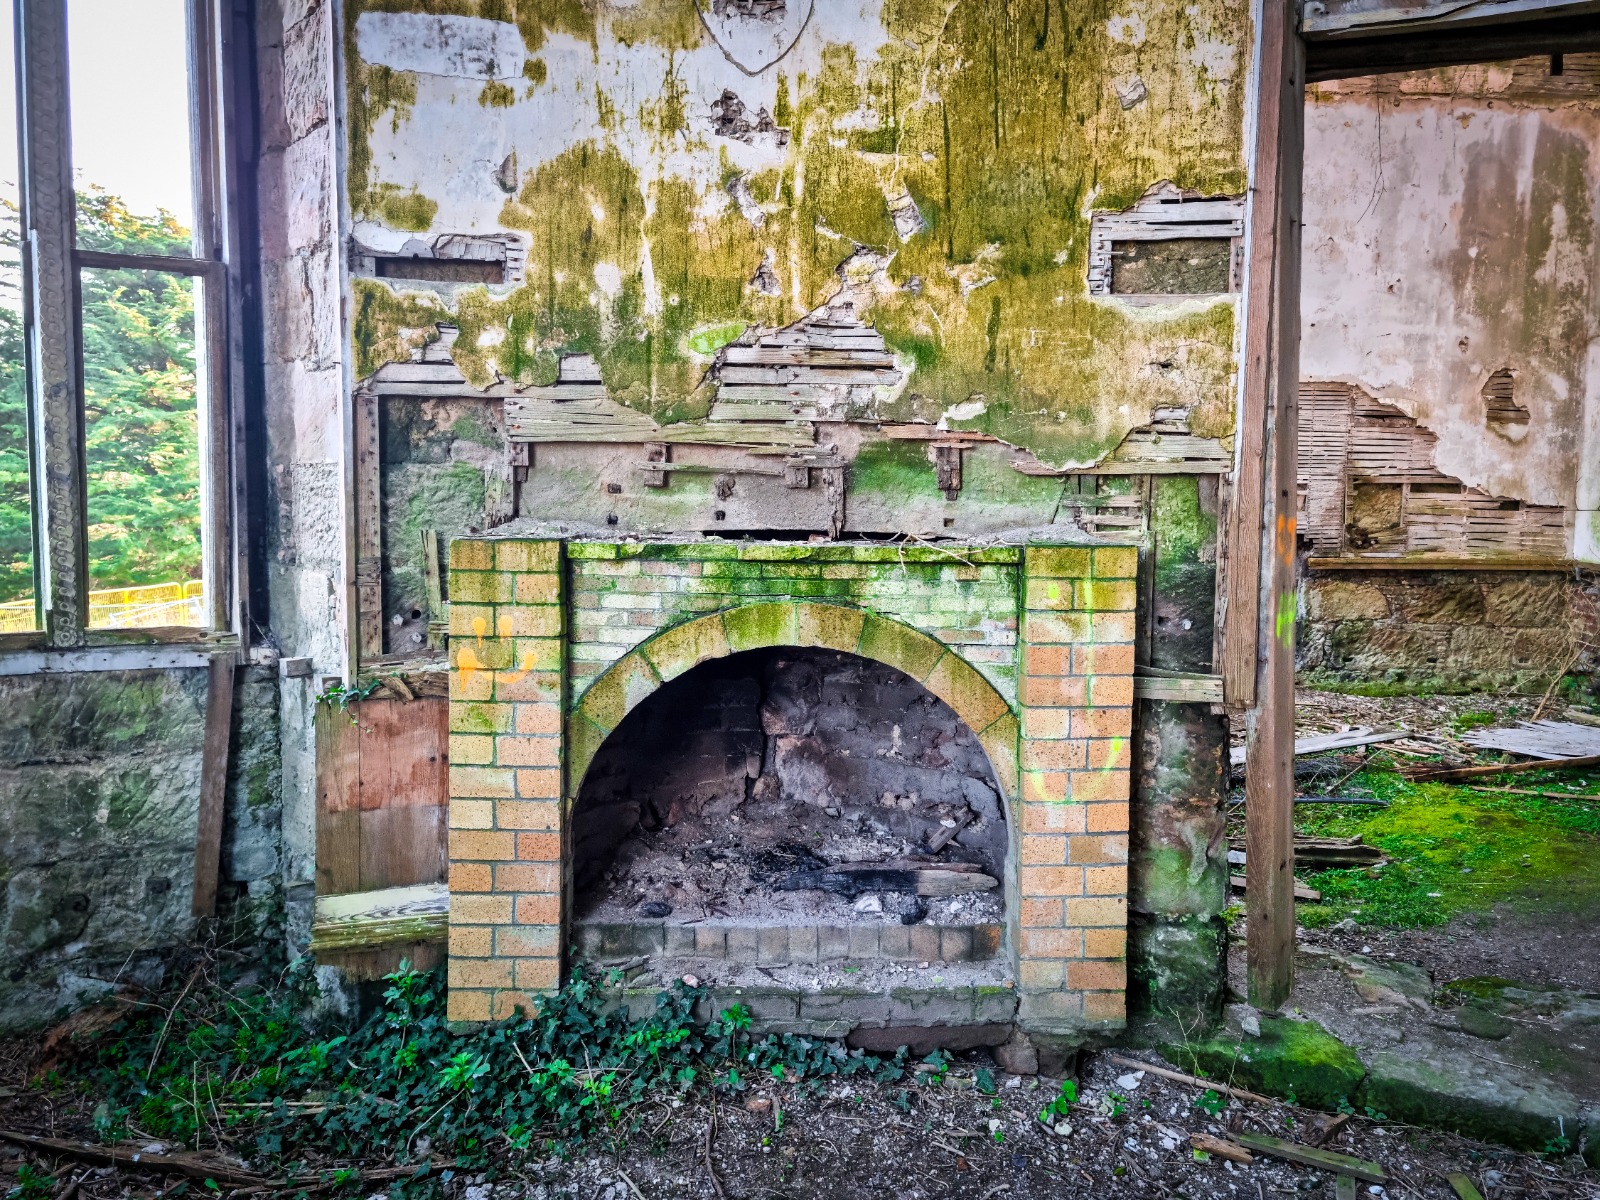 Antique fireplace inside the ruins of a house